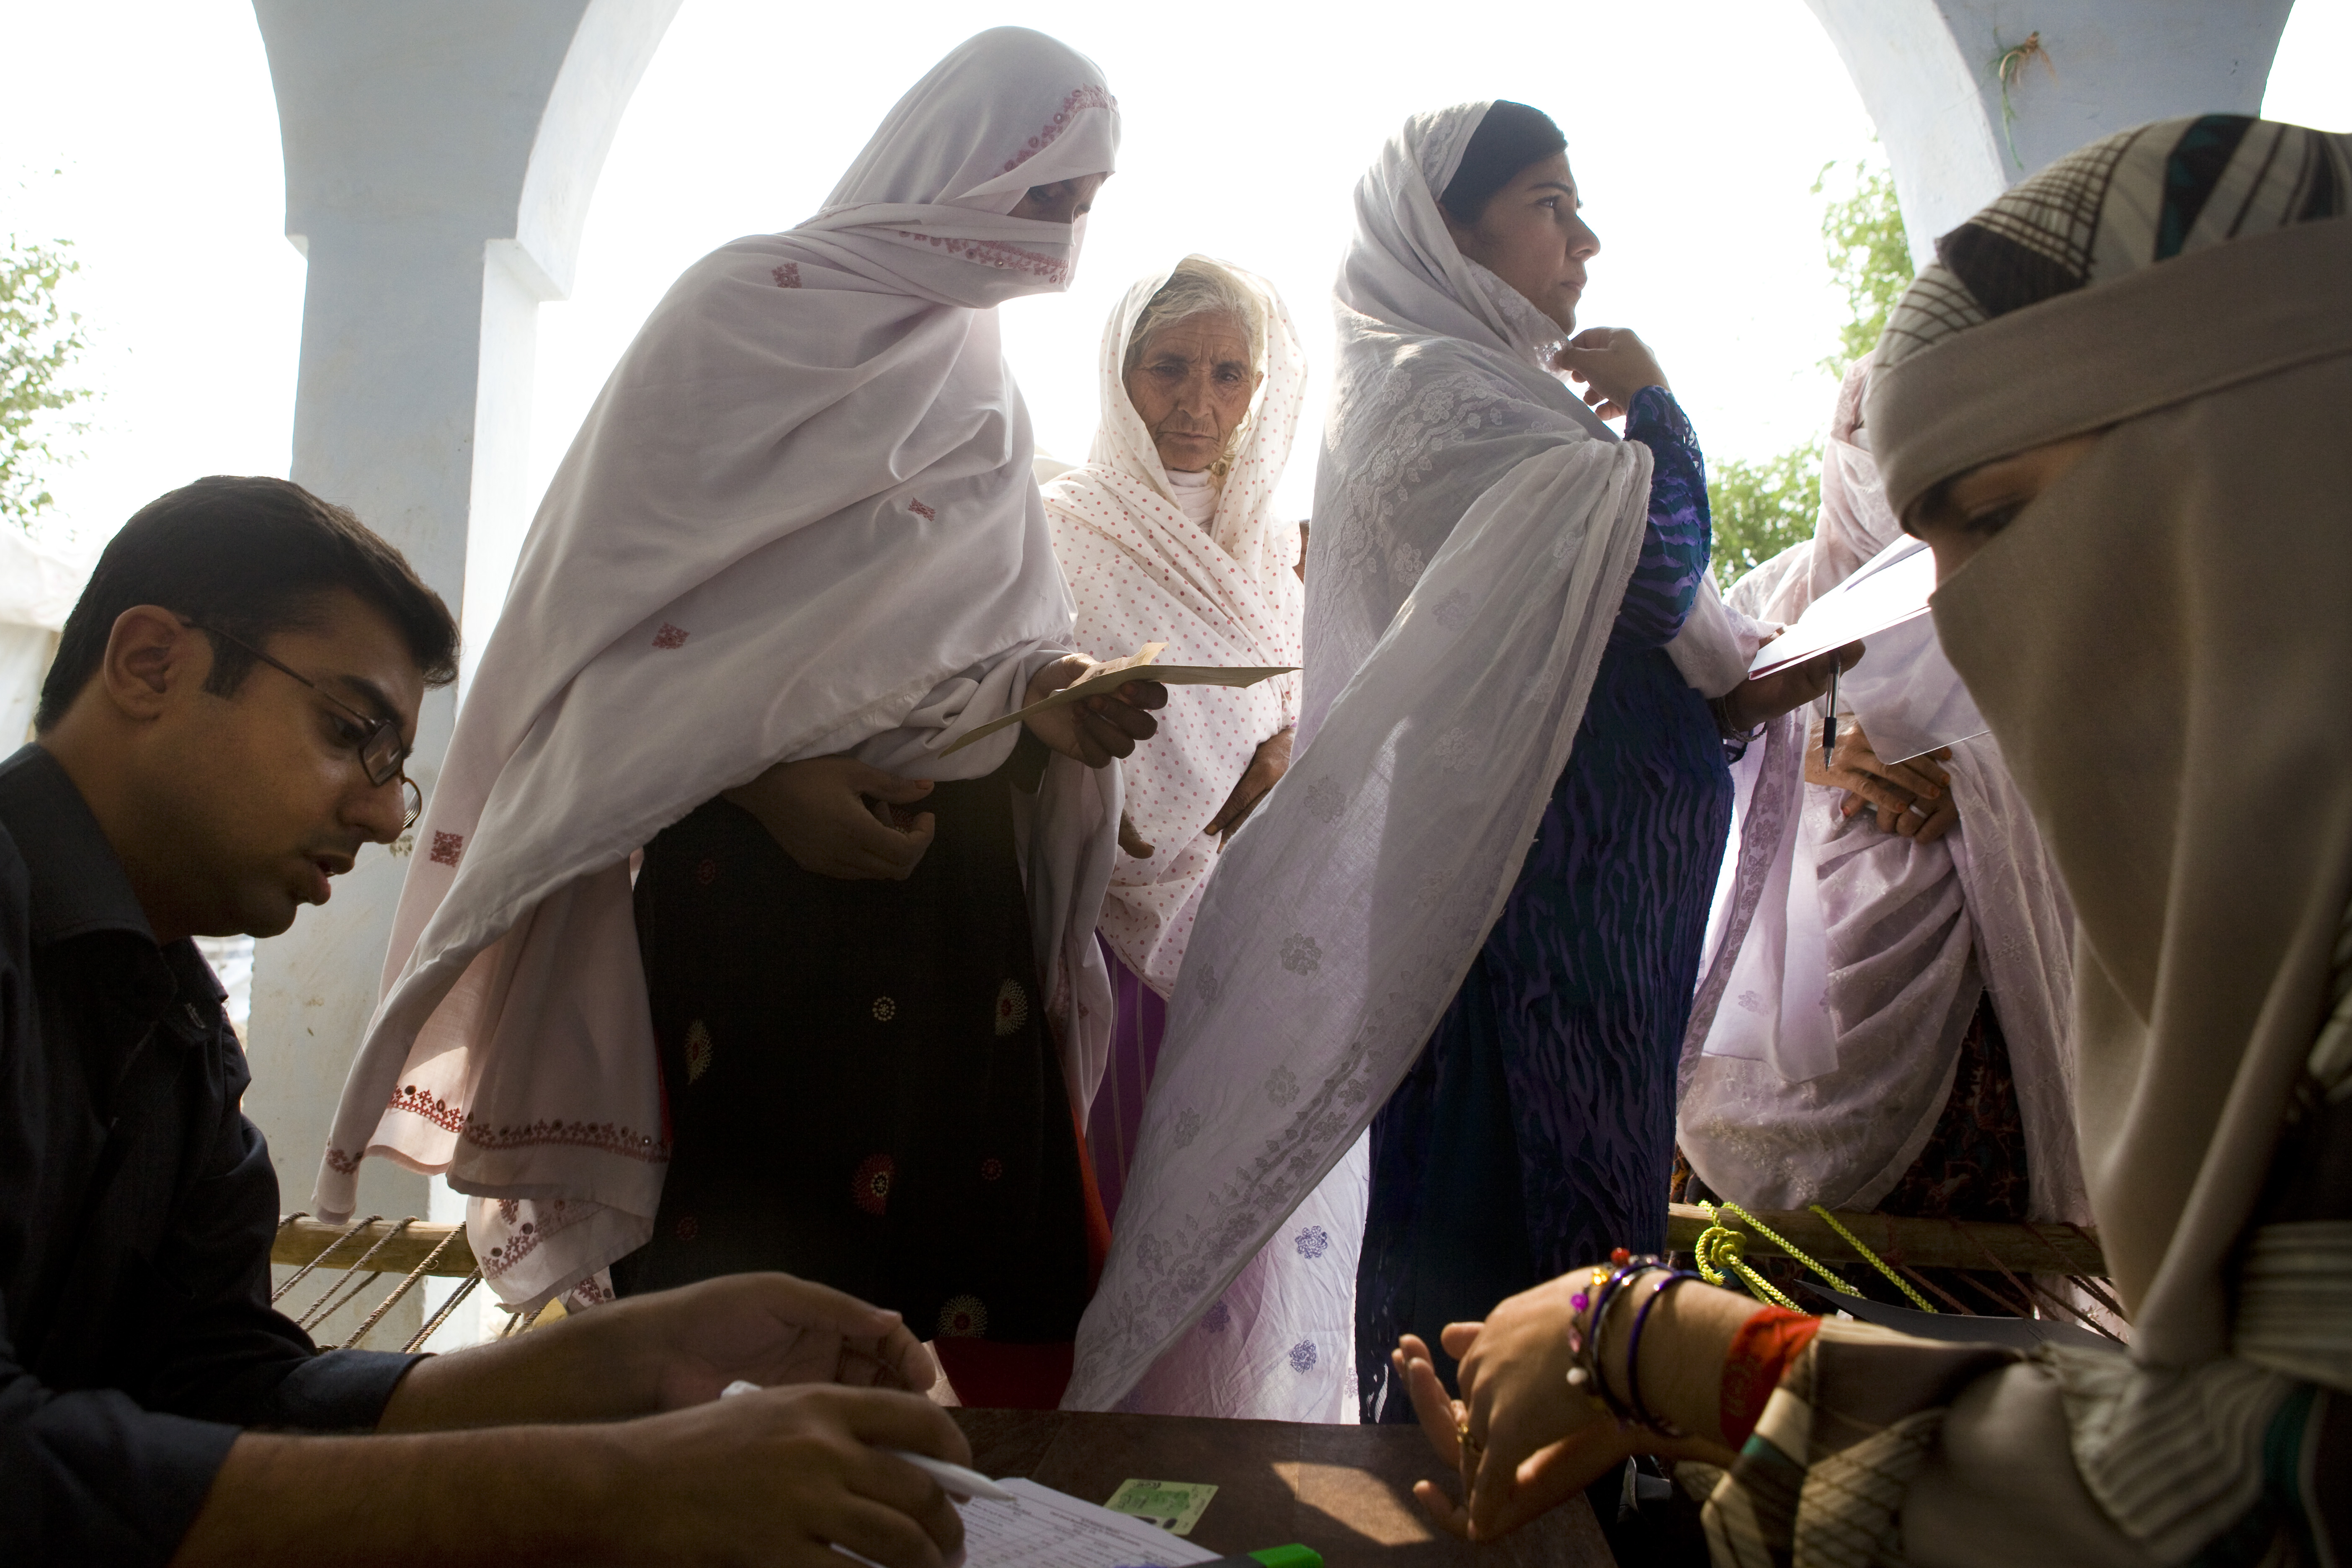 Cash transfers for families affected by floods in Pakistan in 2010